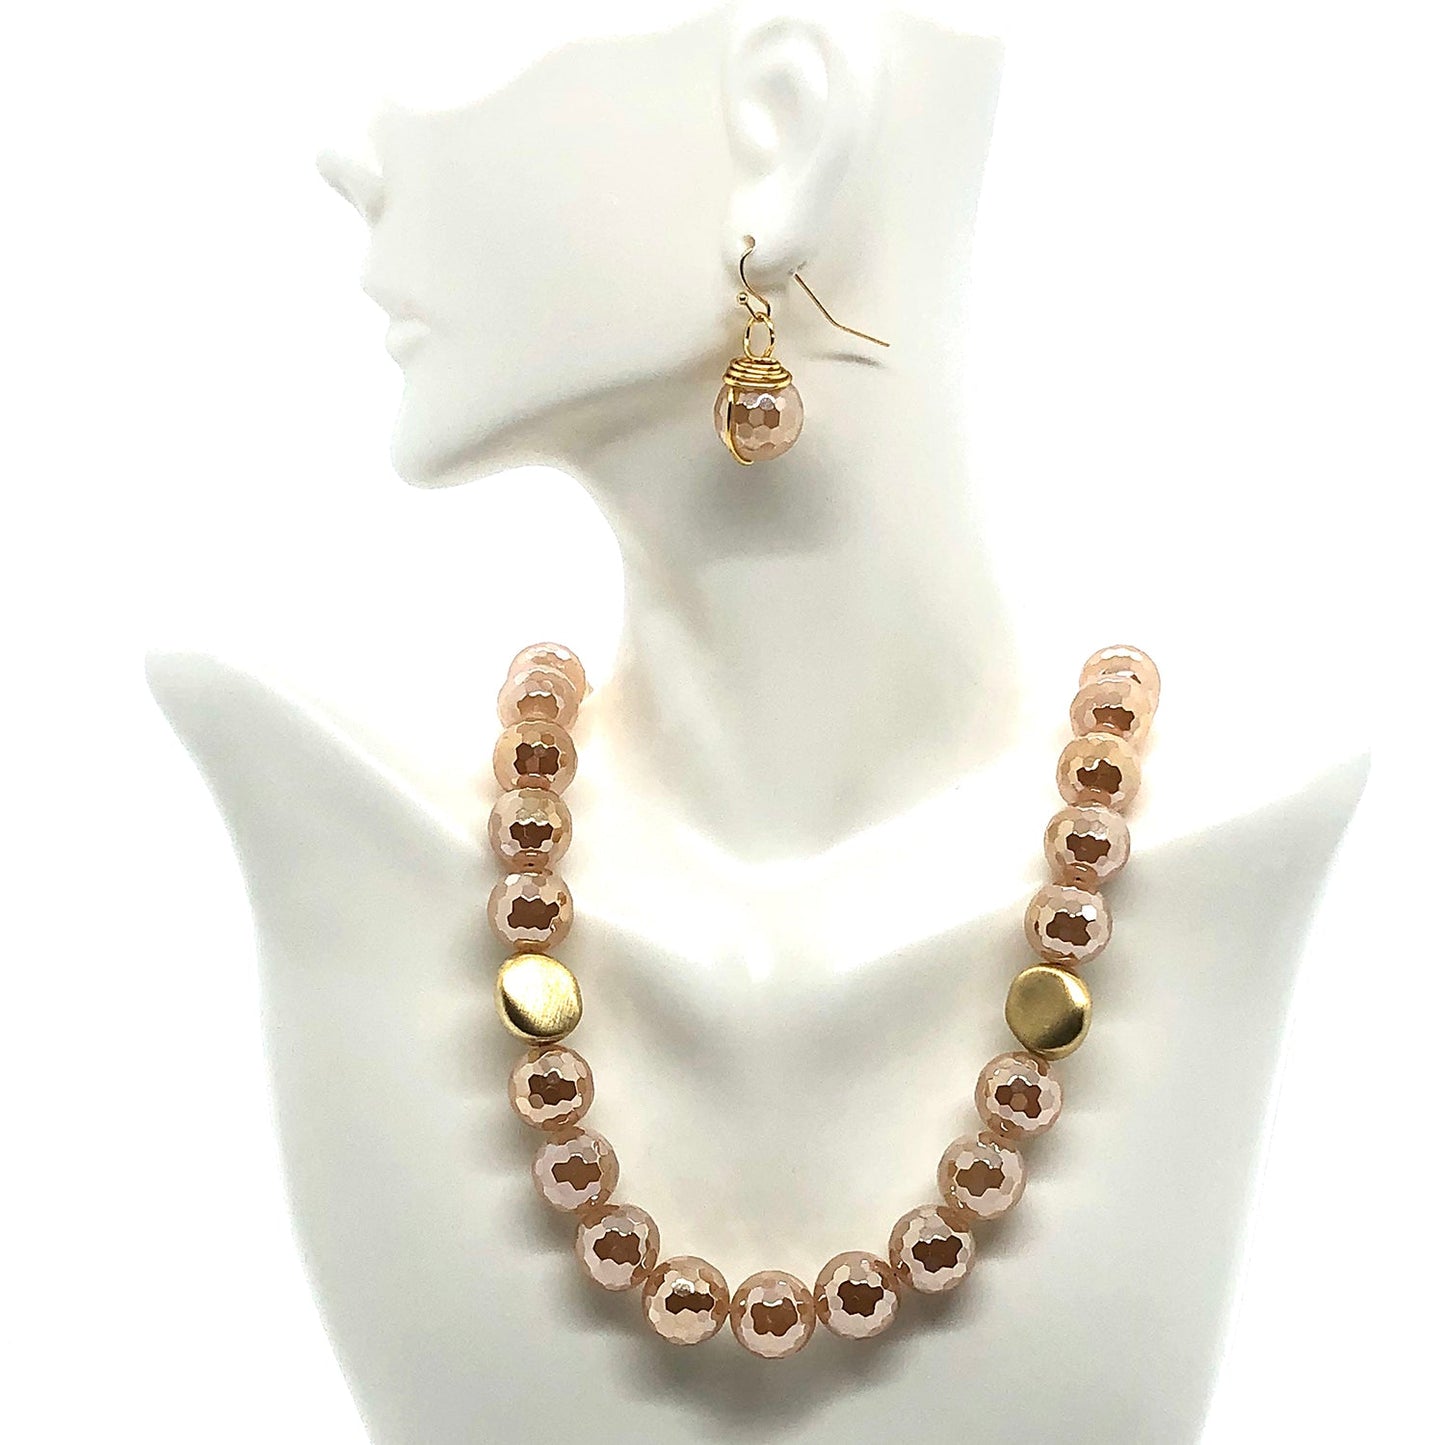 Champagne(Lco) Glazed Agate With Matte Gold Plate Beads Necklace